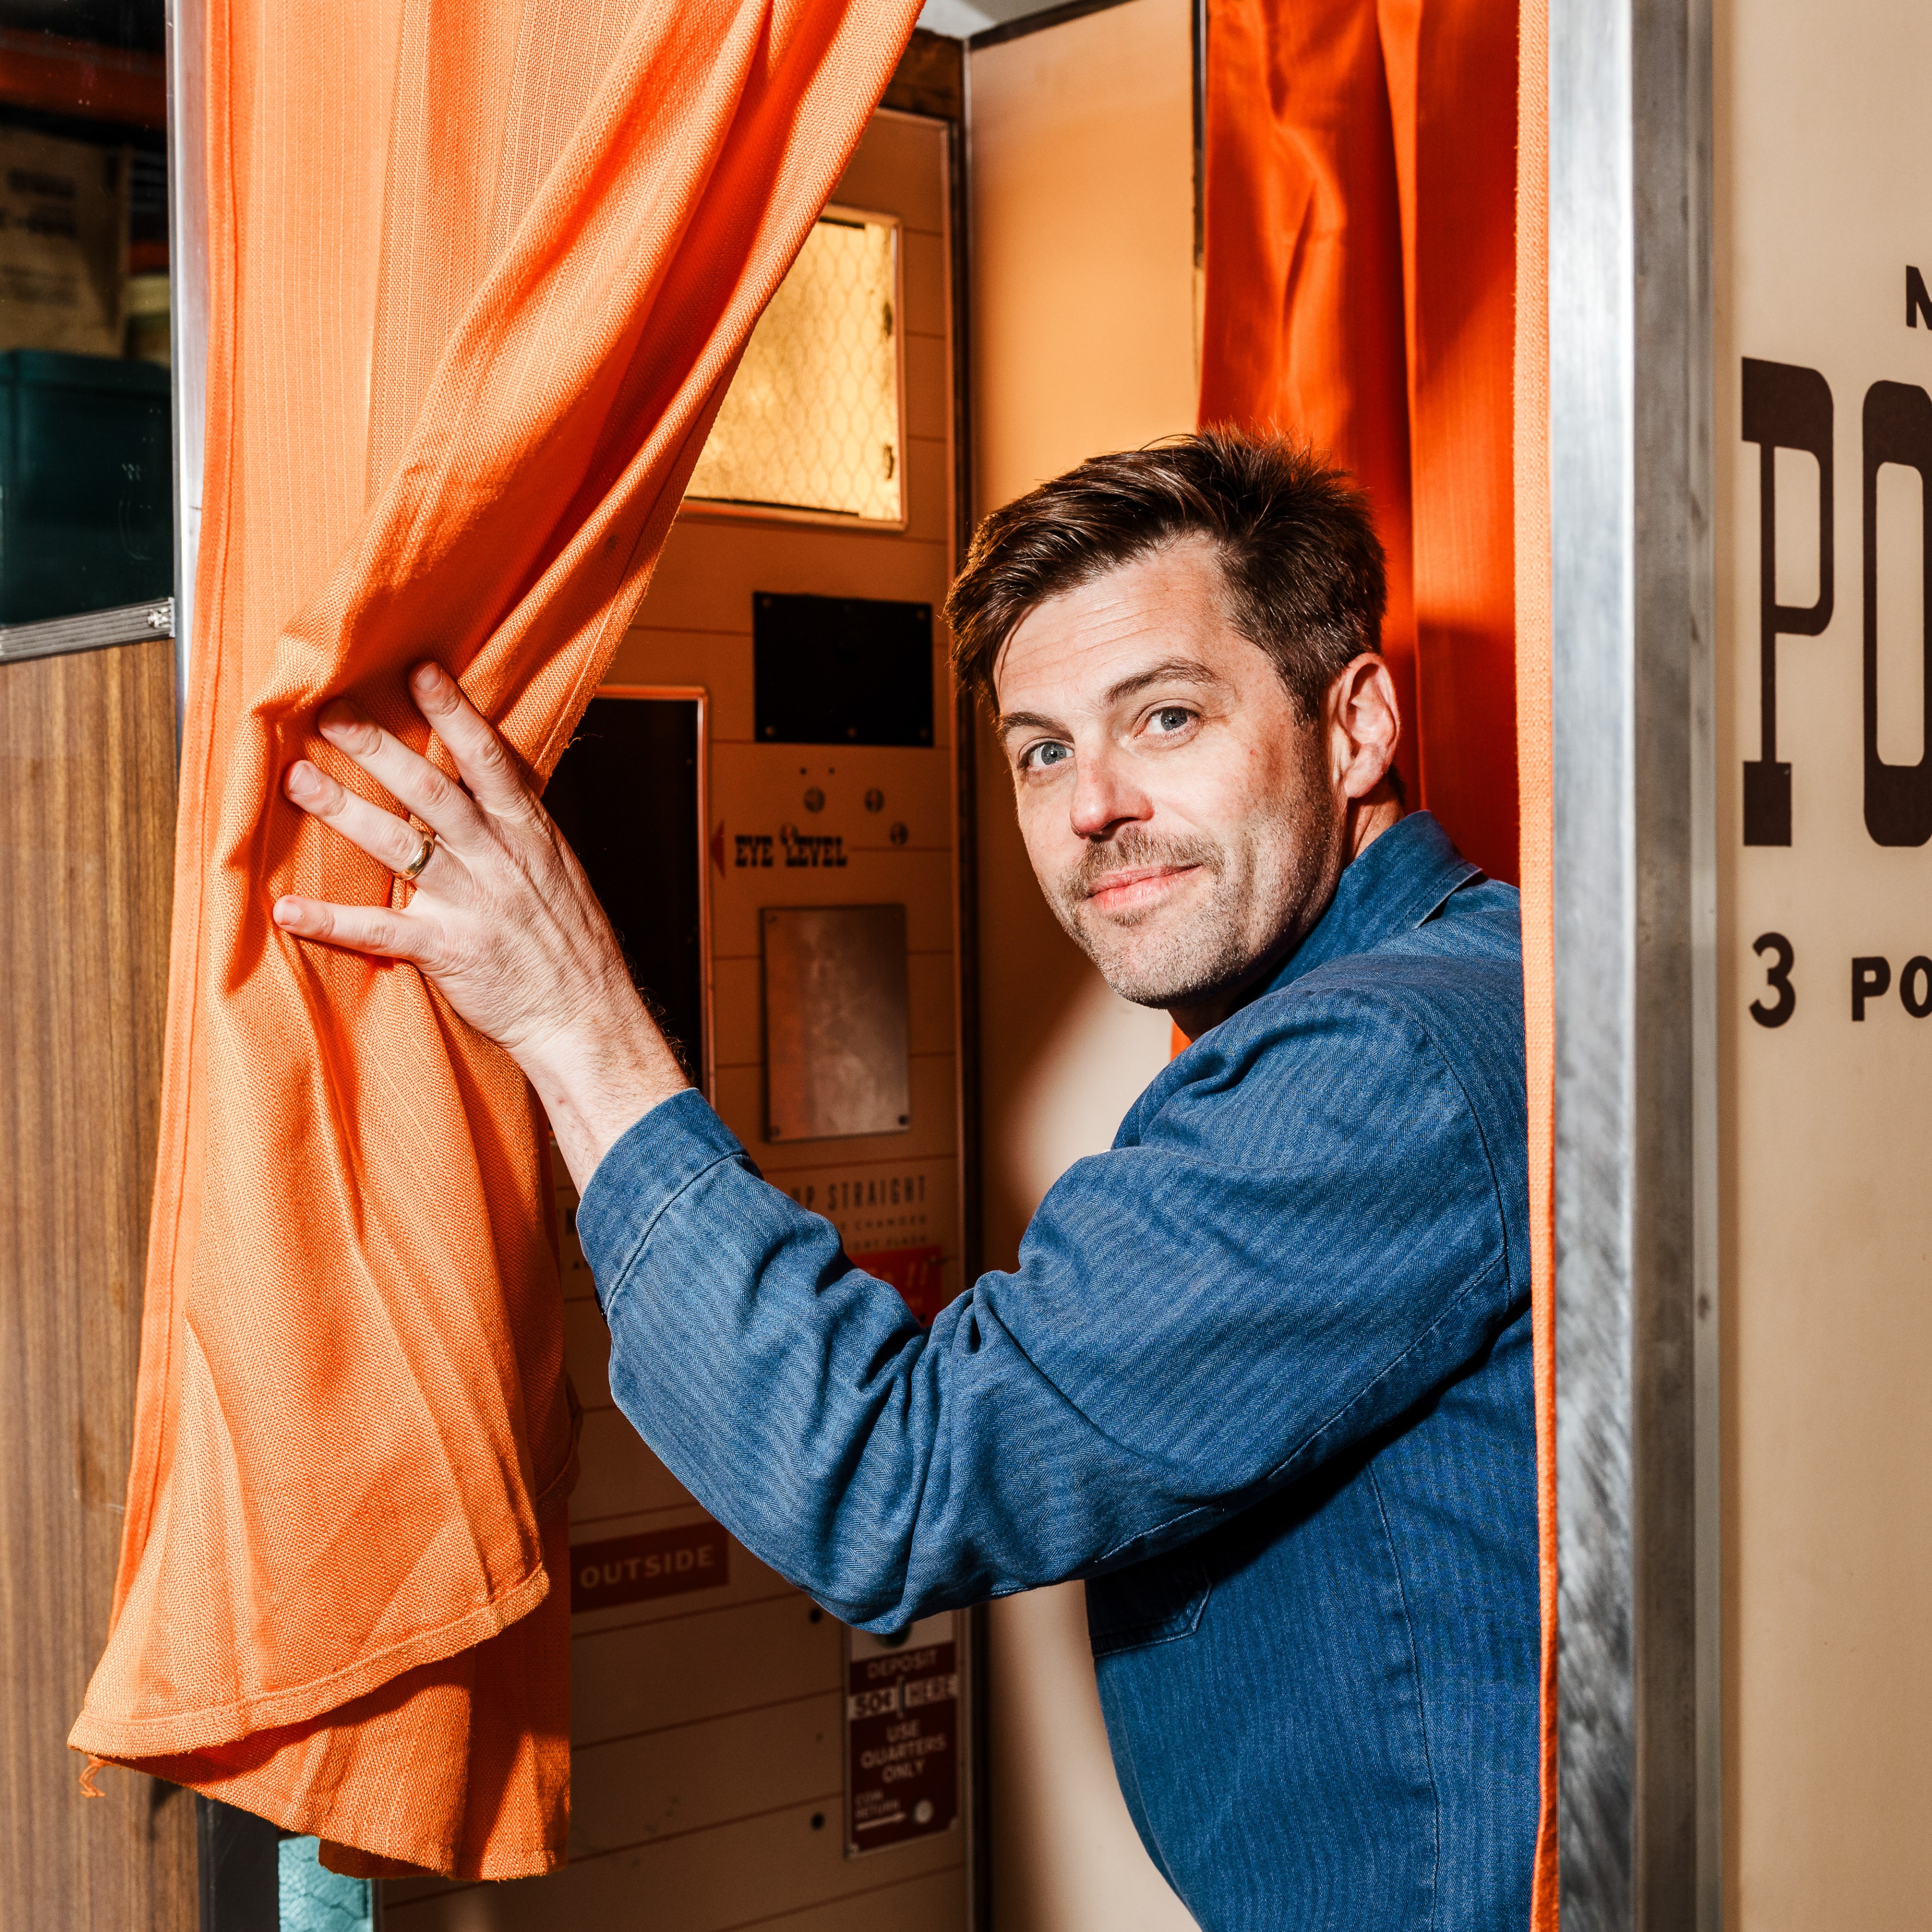 A man with short, dark hair and a light stubble peeks out from behind an orange curtain, holding it open with one hand. He stands inside a photo booth.